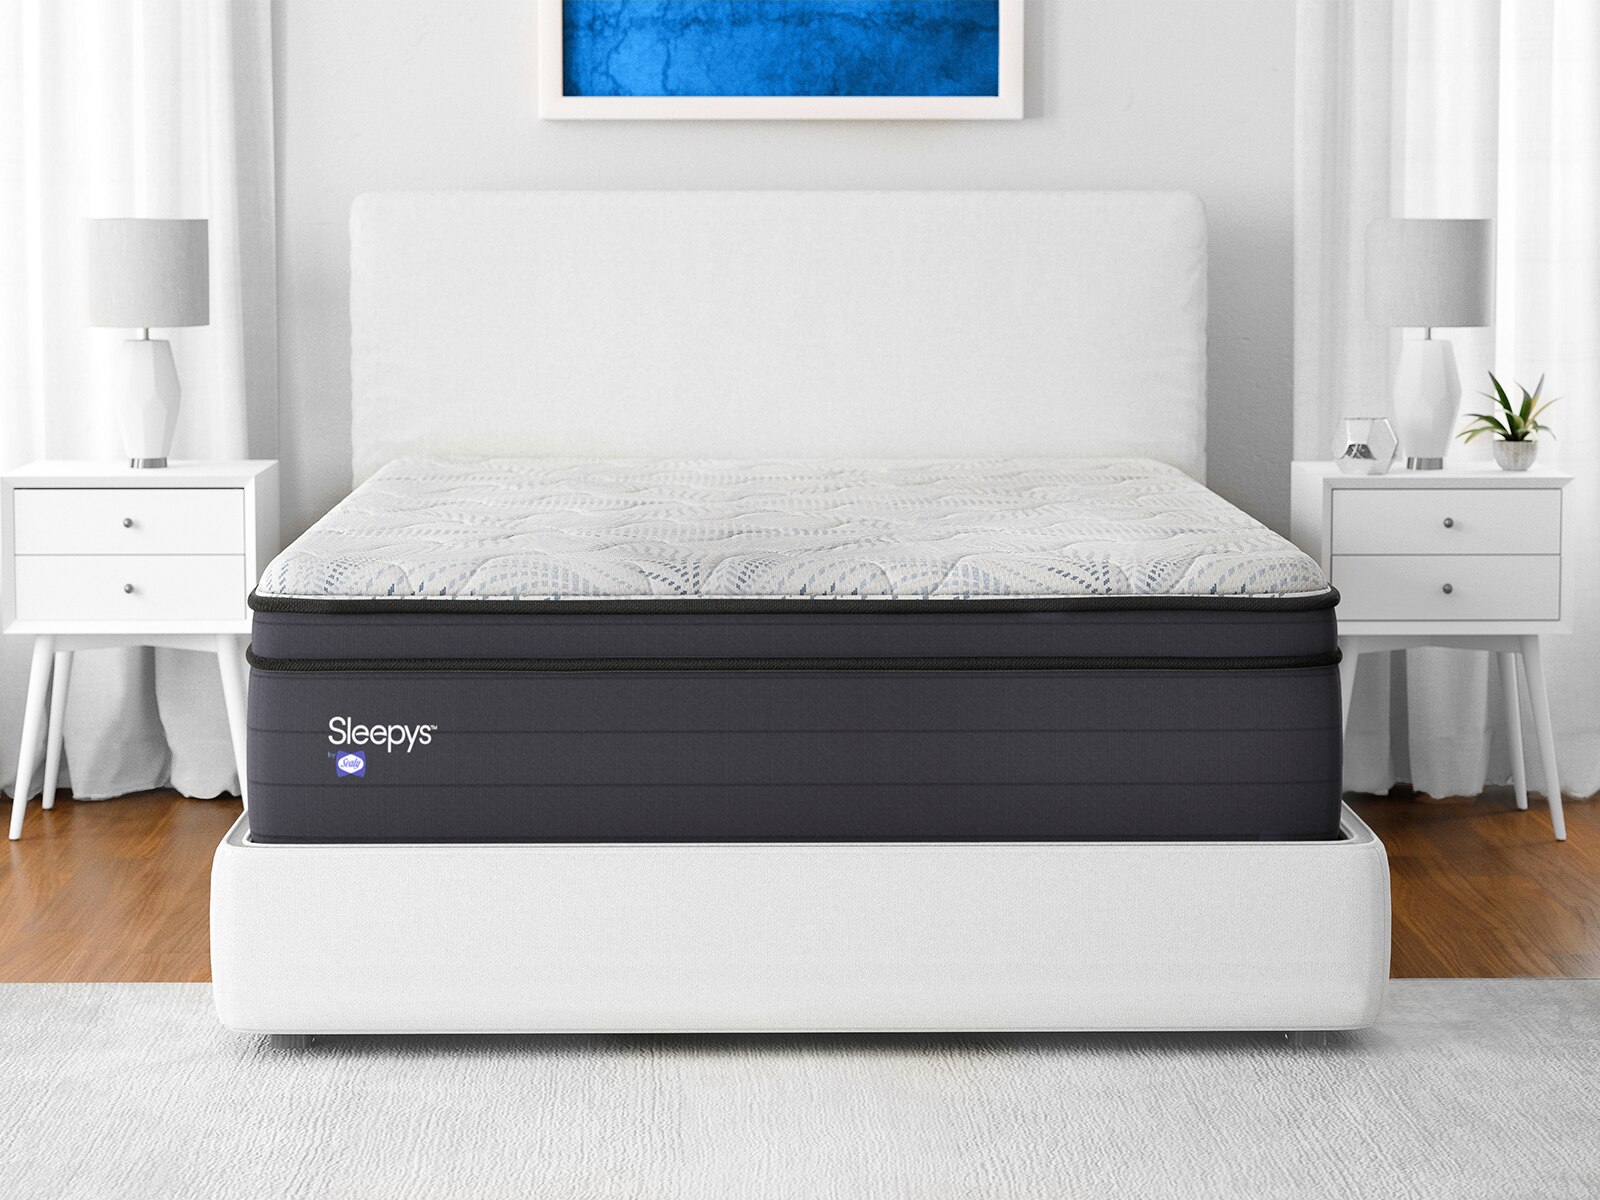 mattress firm sleepy by sealy euro top